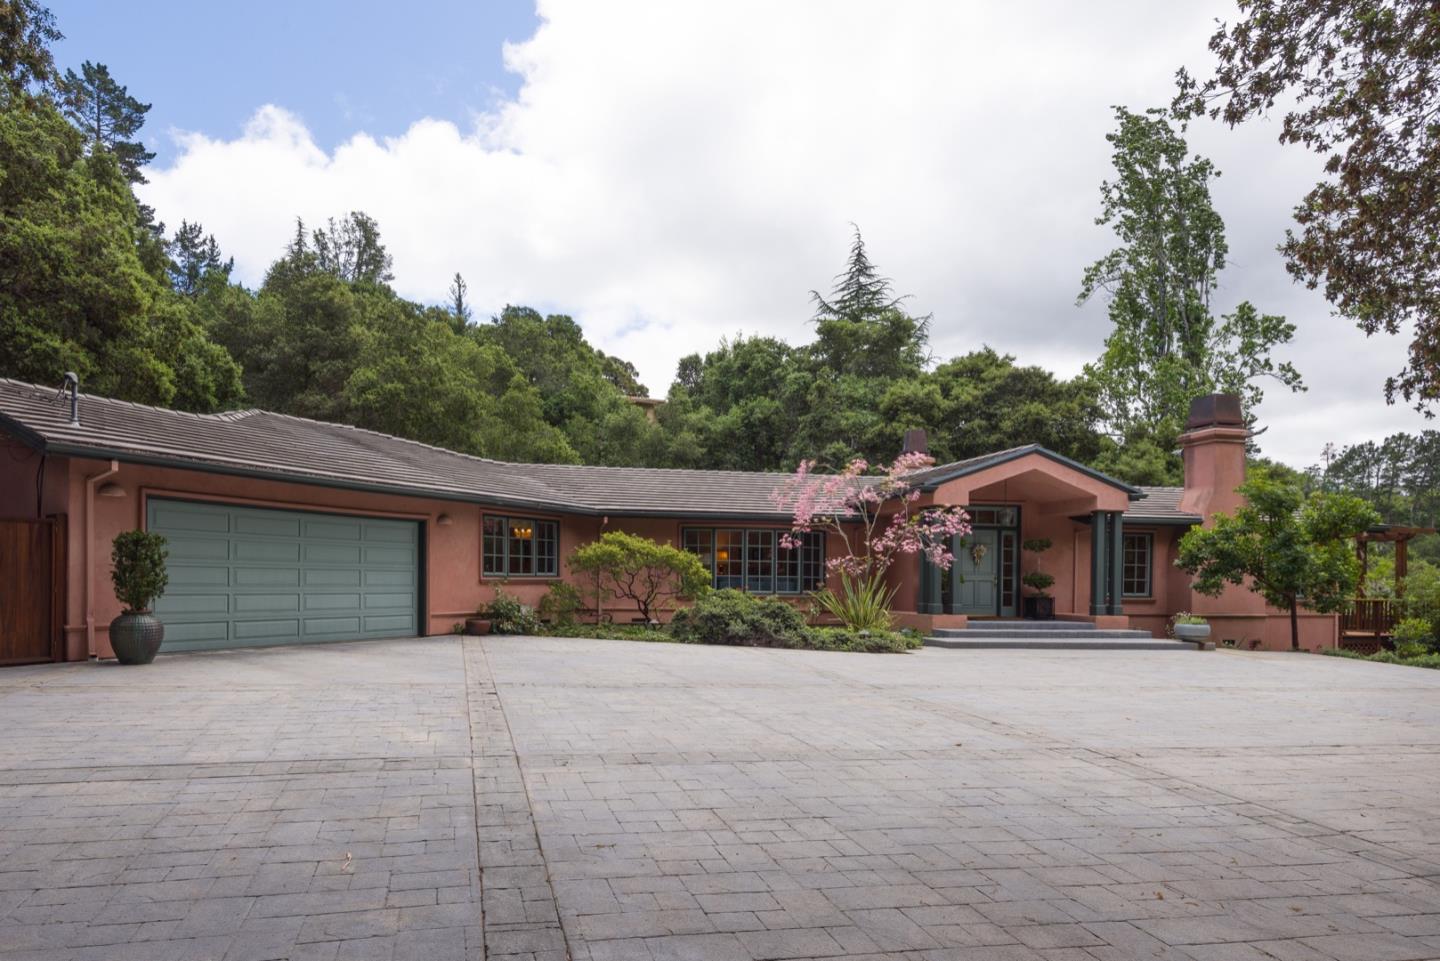 Photo of 140 Fawn Ln in Portola Valley, CA